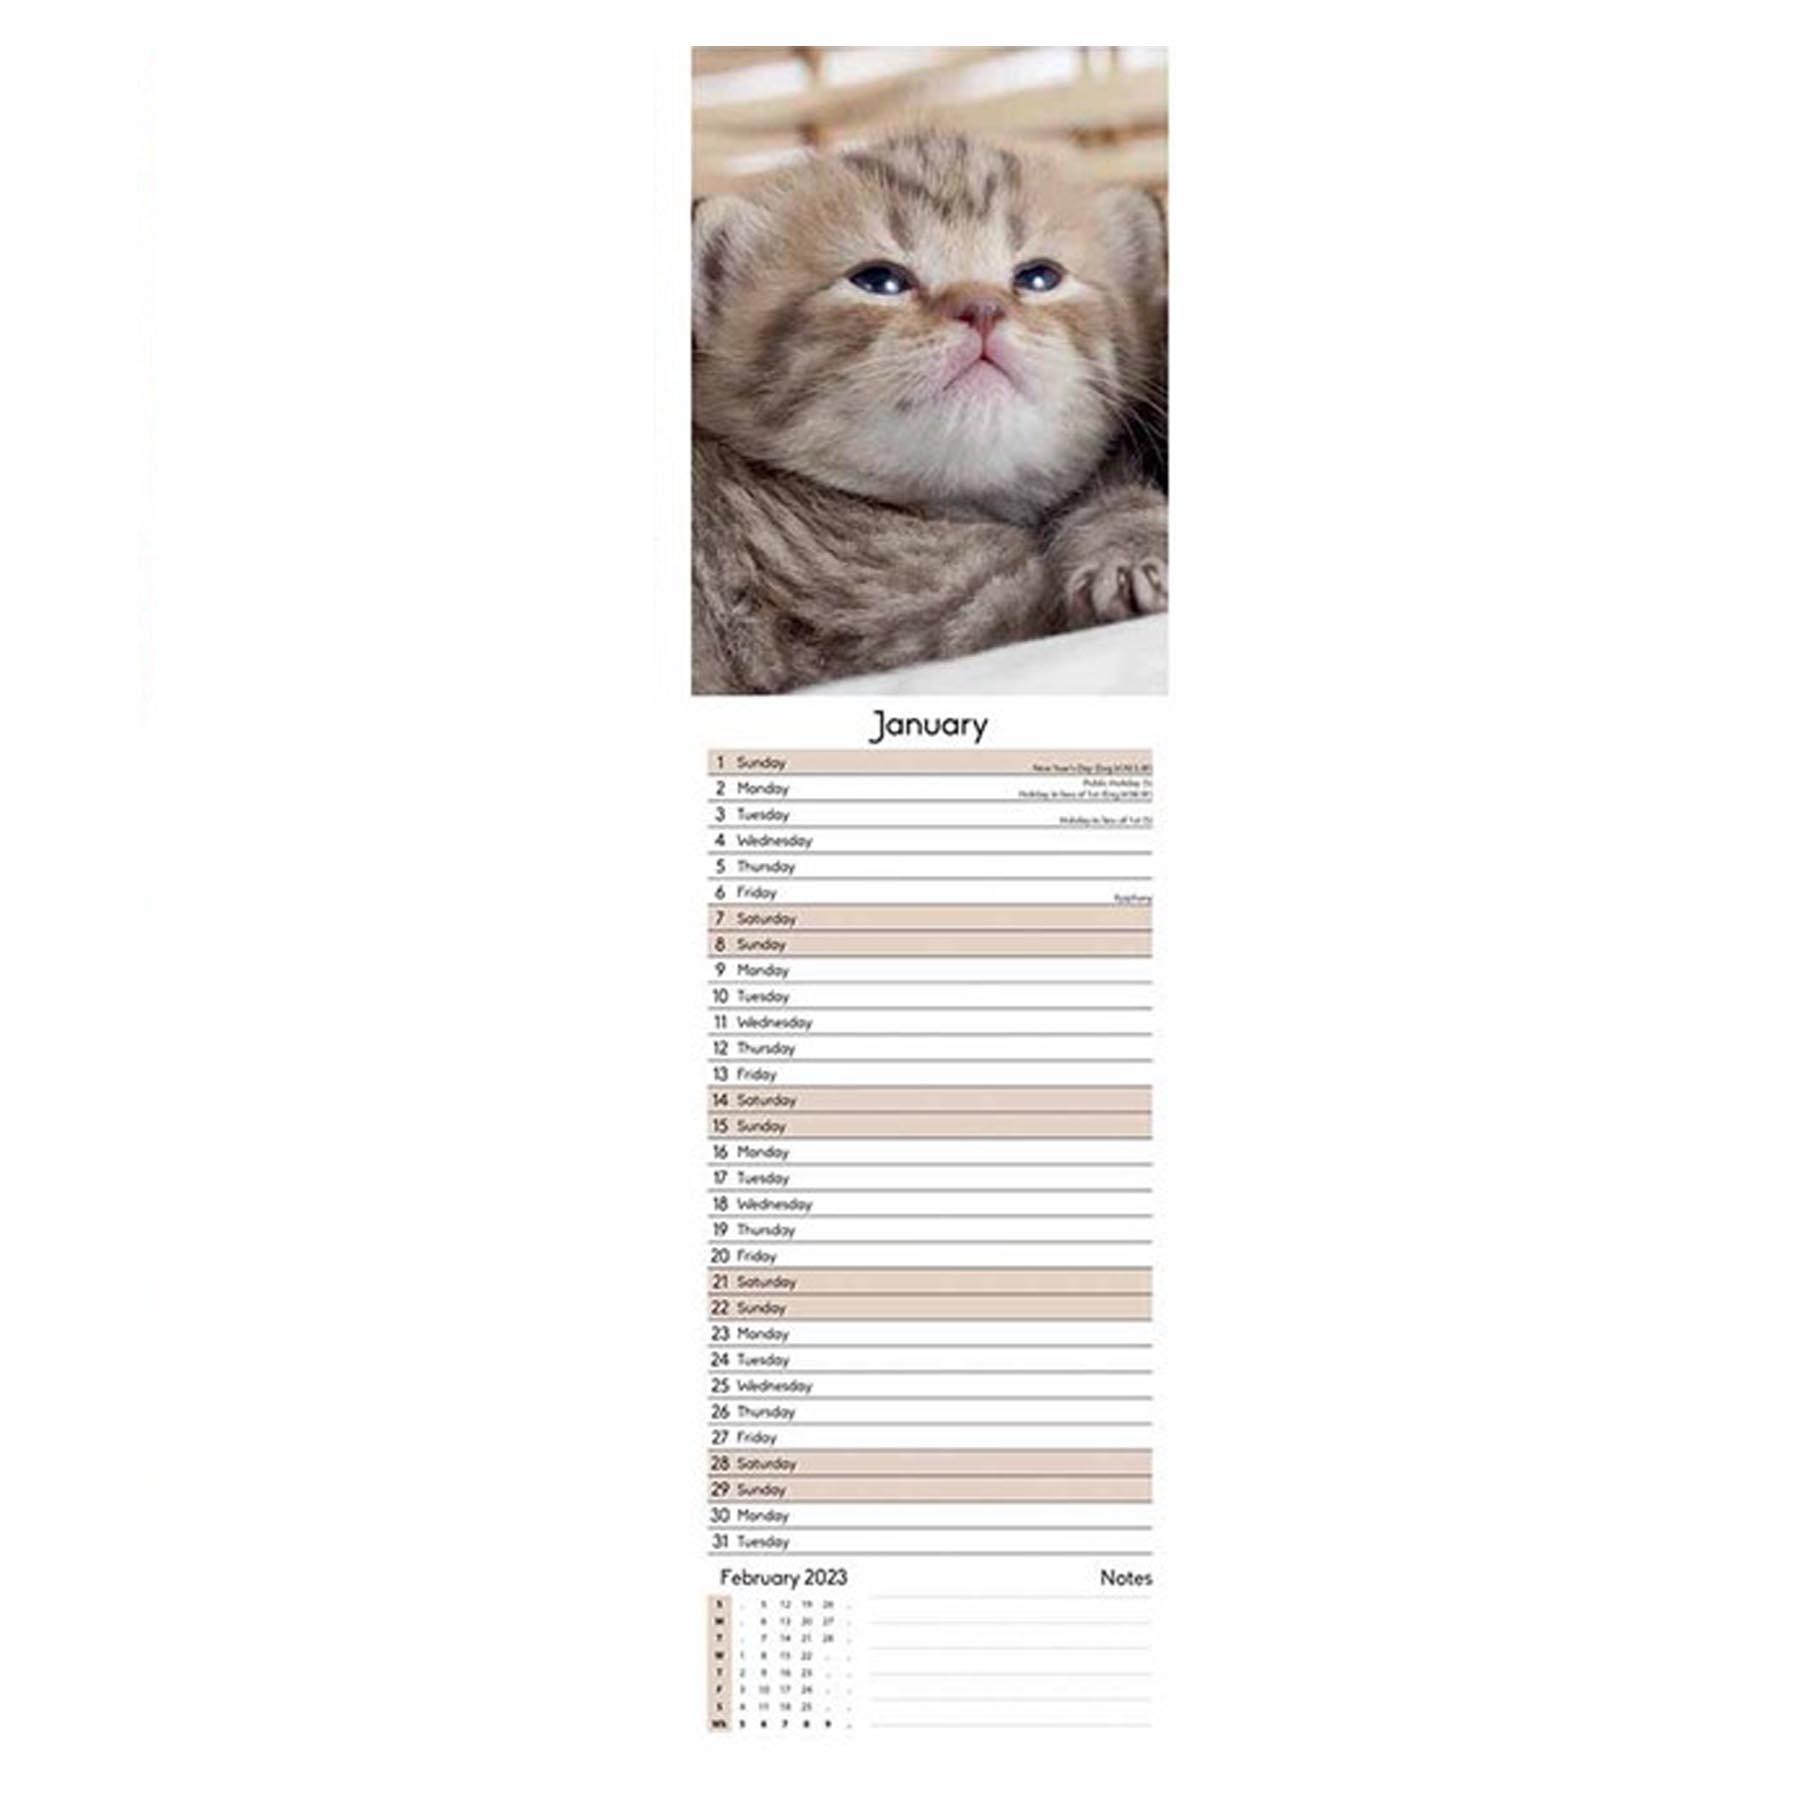 2023 Slimline Wall Calendar Month to View and Matching Diary - Kittens